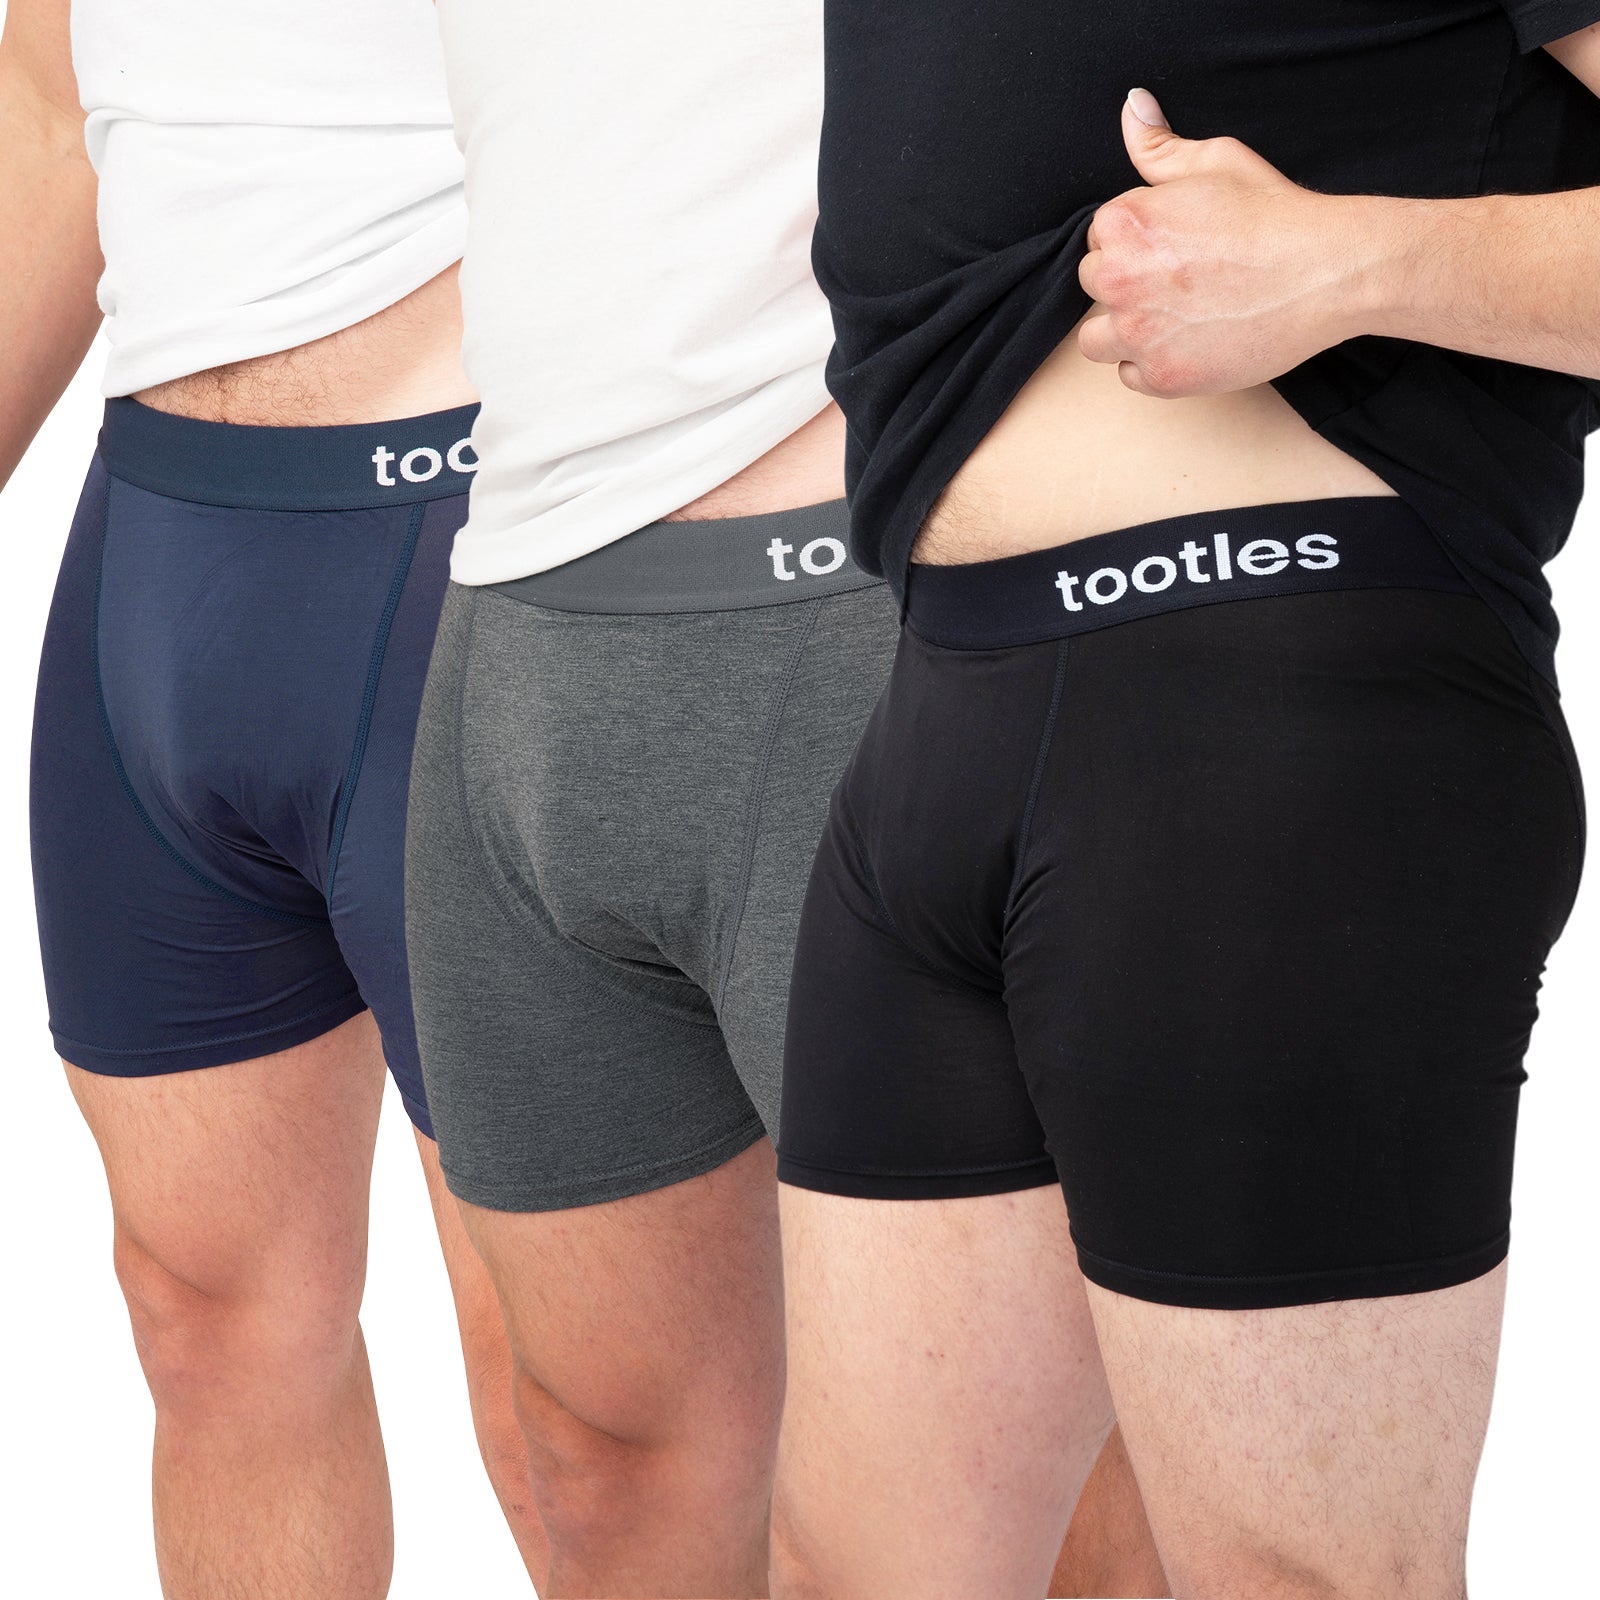  Fart Filtering Underwear by TOOTLES - Mens Briefs with 100%  Activated Charcoal Underwear Liners - Neutralizes & Eliminates Flatulence  Odor - 95% Cotton, 5% Spandex : Health & Household